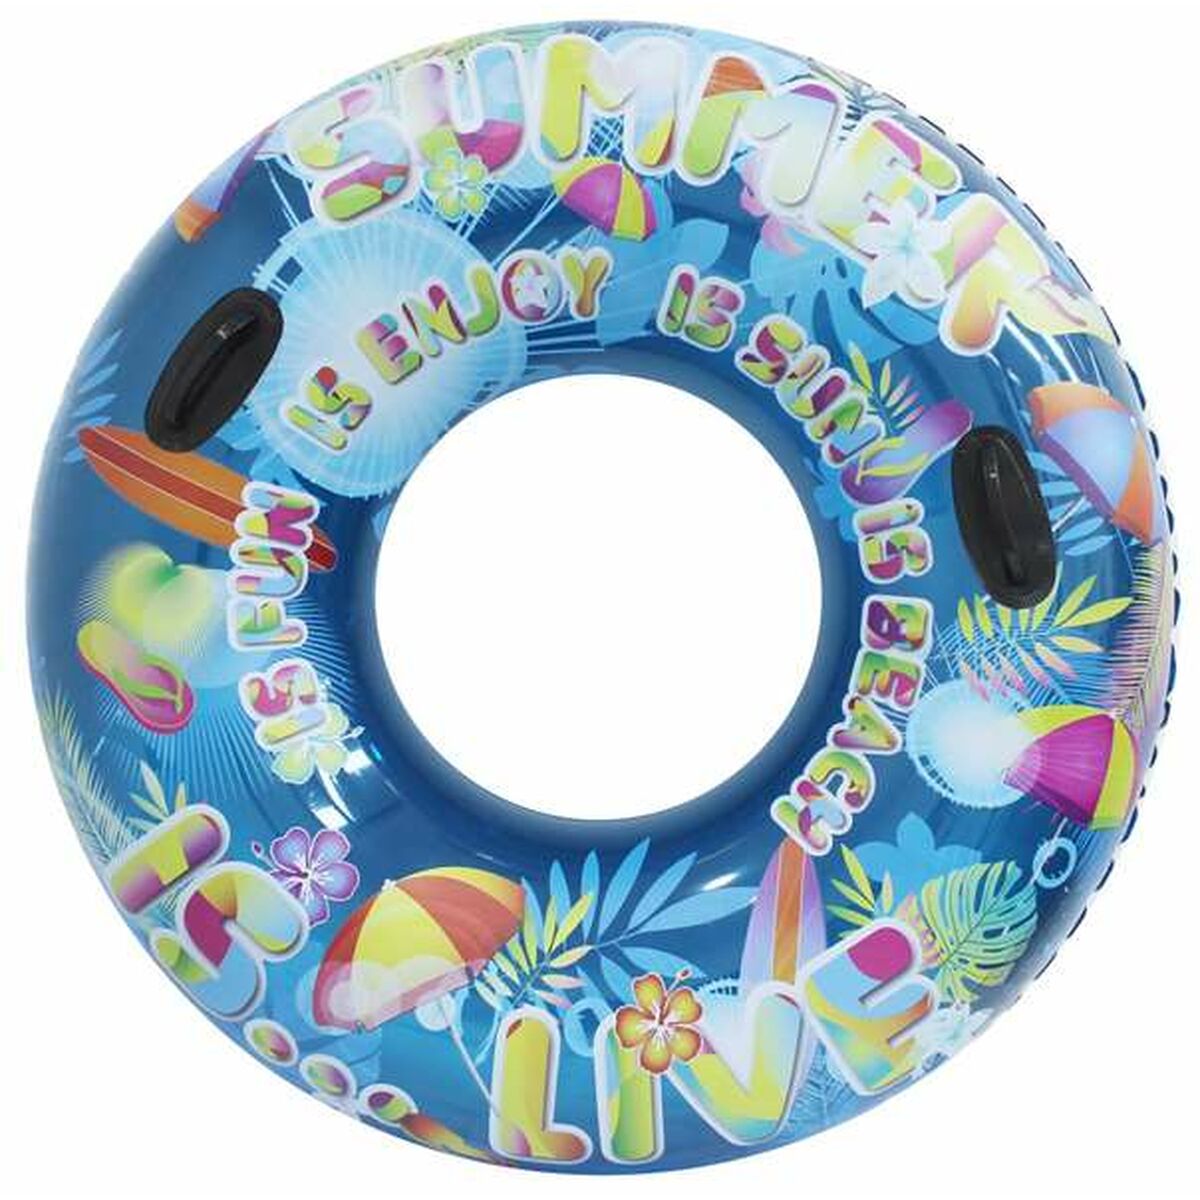 Inflatable Floating Doughnut The summer is fun